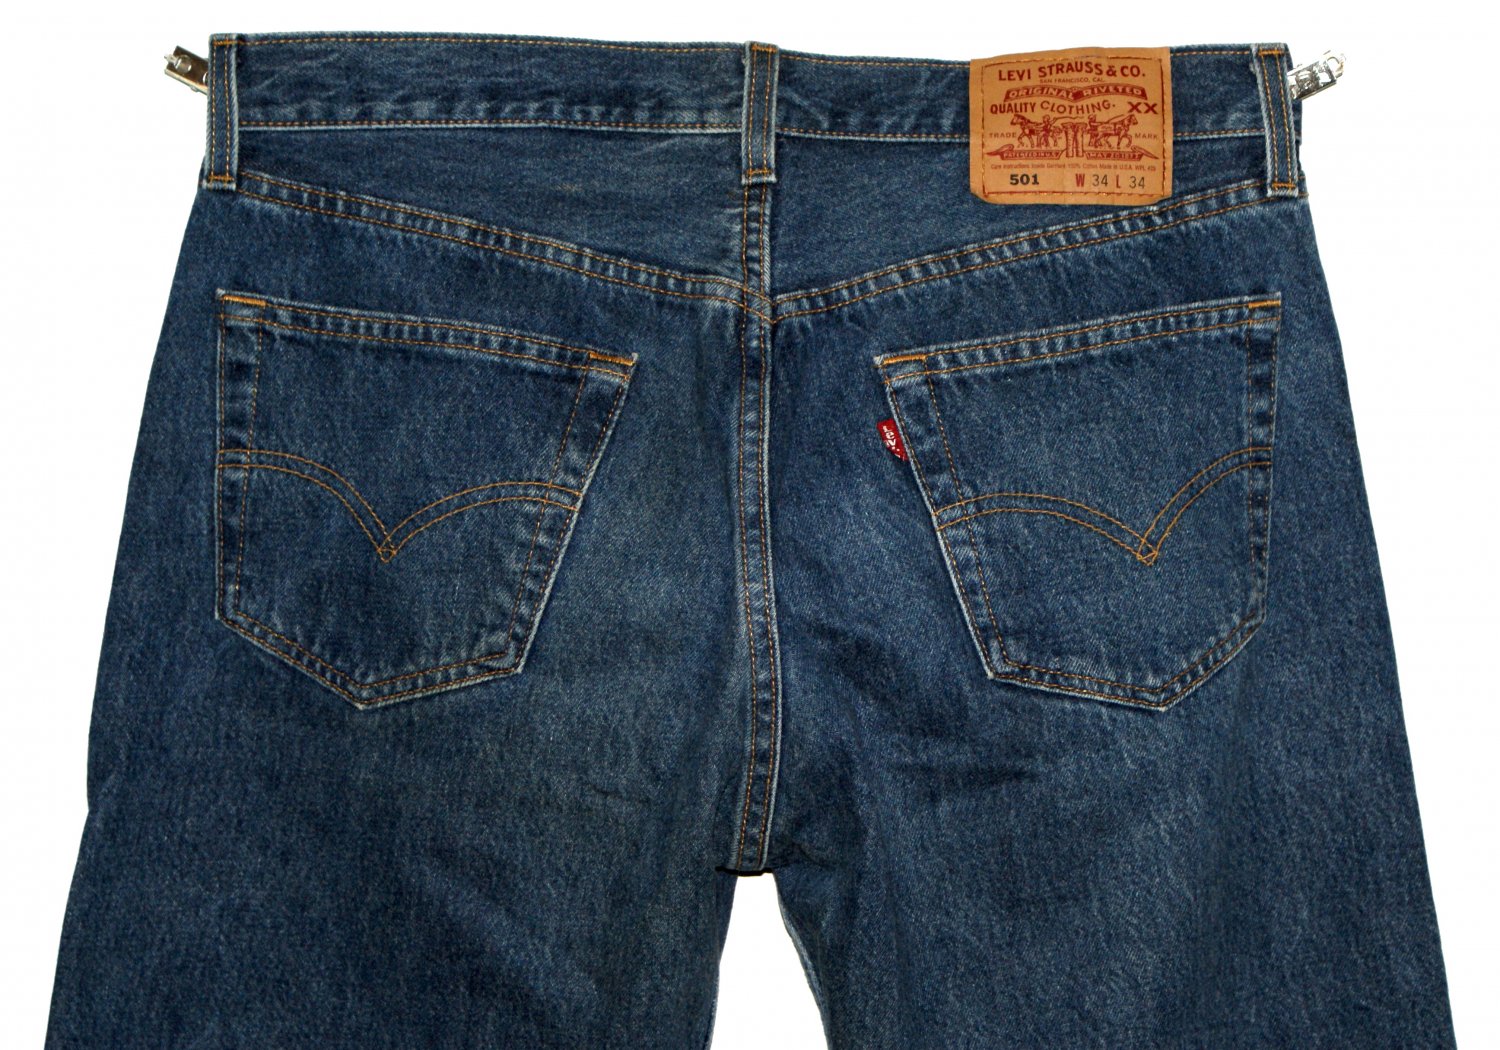 VINTAGE 1998 LEVI'S 501 CLASSIC BLUE DENIM JEANS - Made in USA in size ...